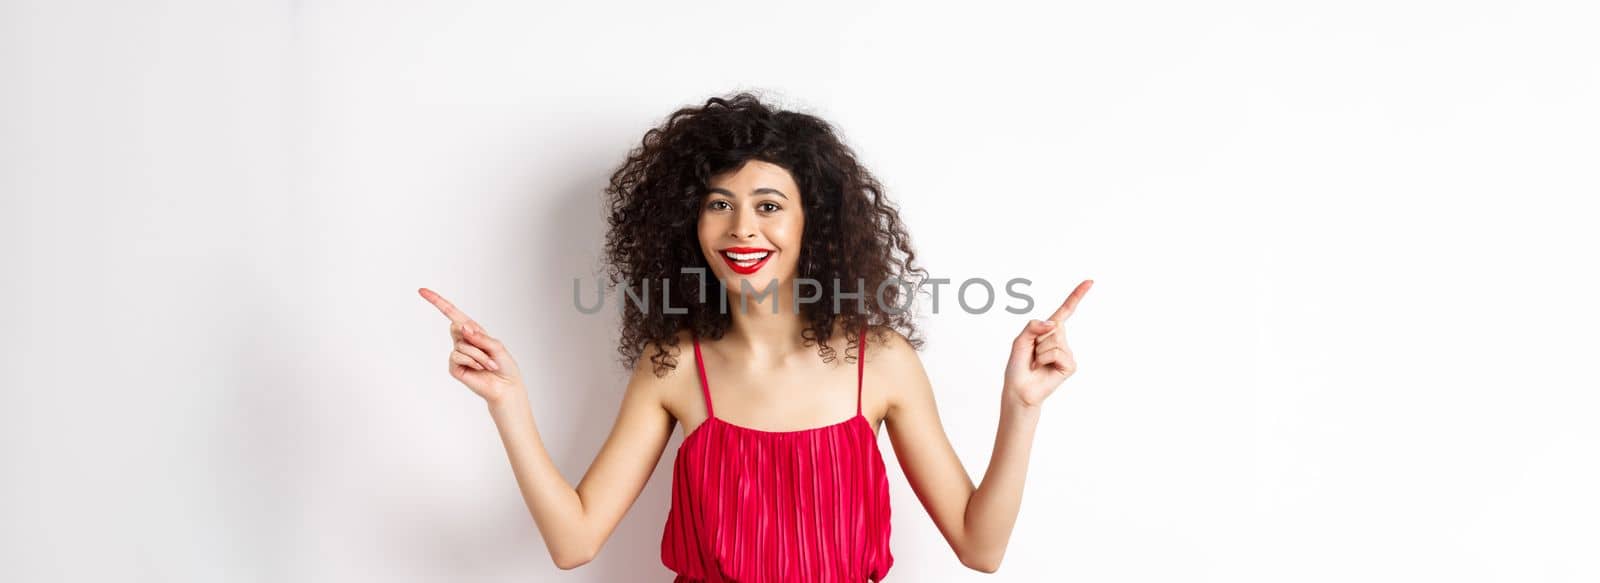 Happy lady with curly hairstyle and red lips, smiling white teeth, pointing sideways at two ways, showing advertisements aside, standing on white background.